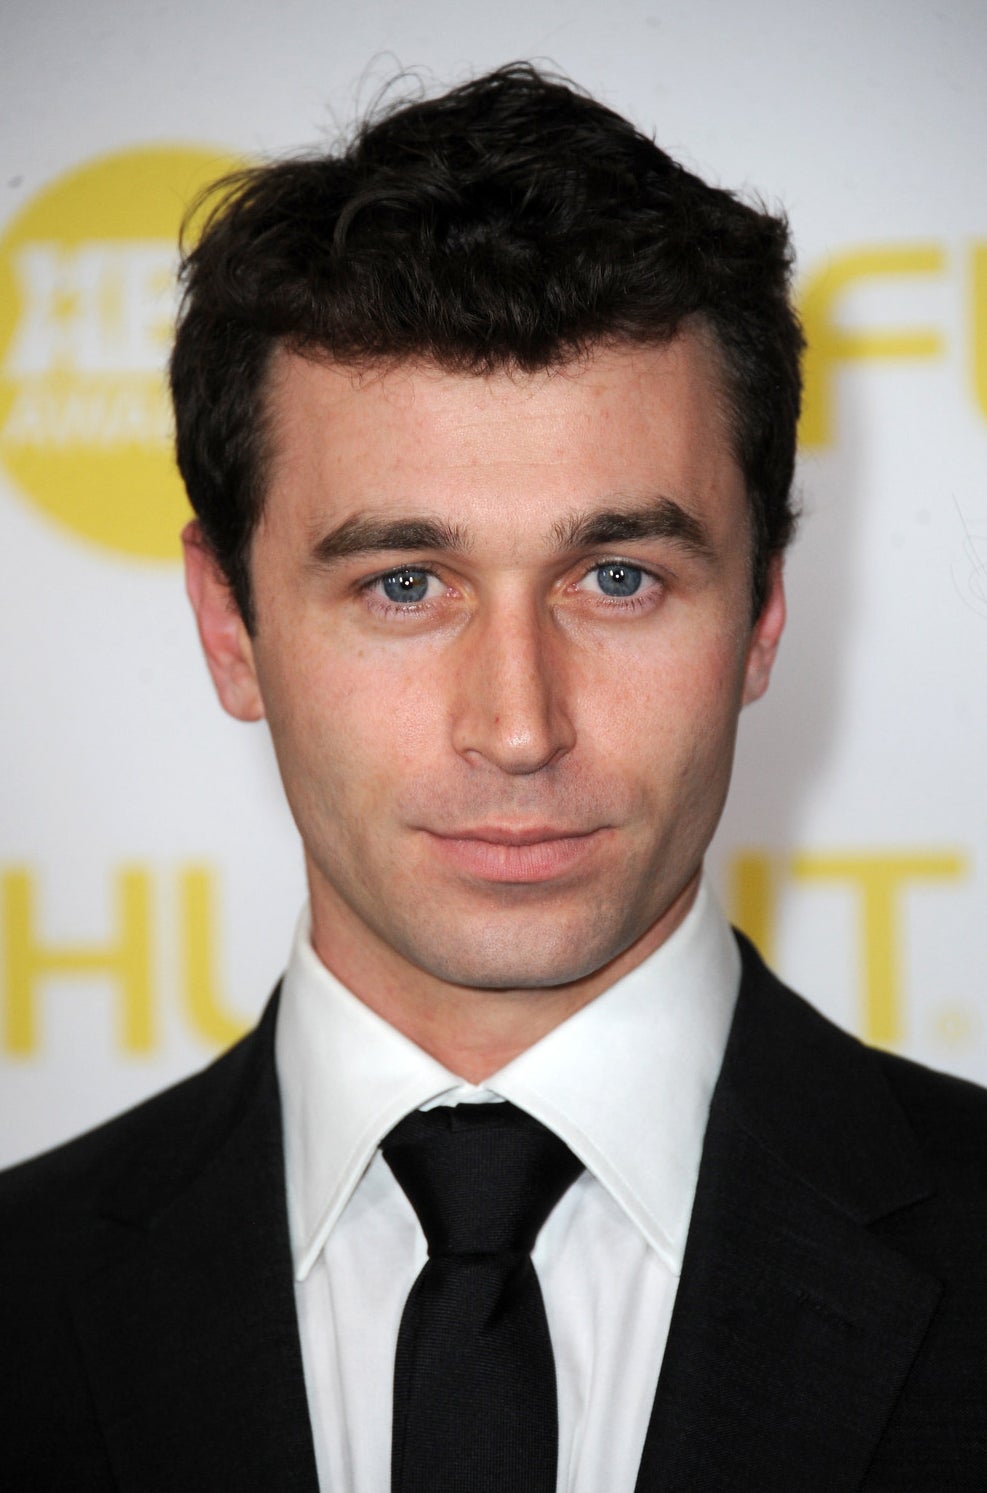 Male Porn Star James Deen - 15 Things You Might Not Know About Porn Star James Deen